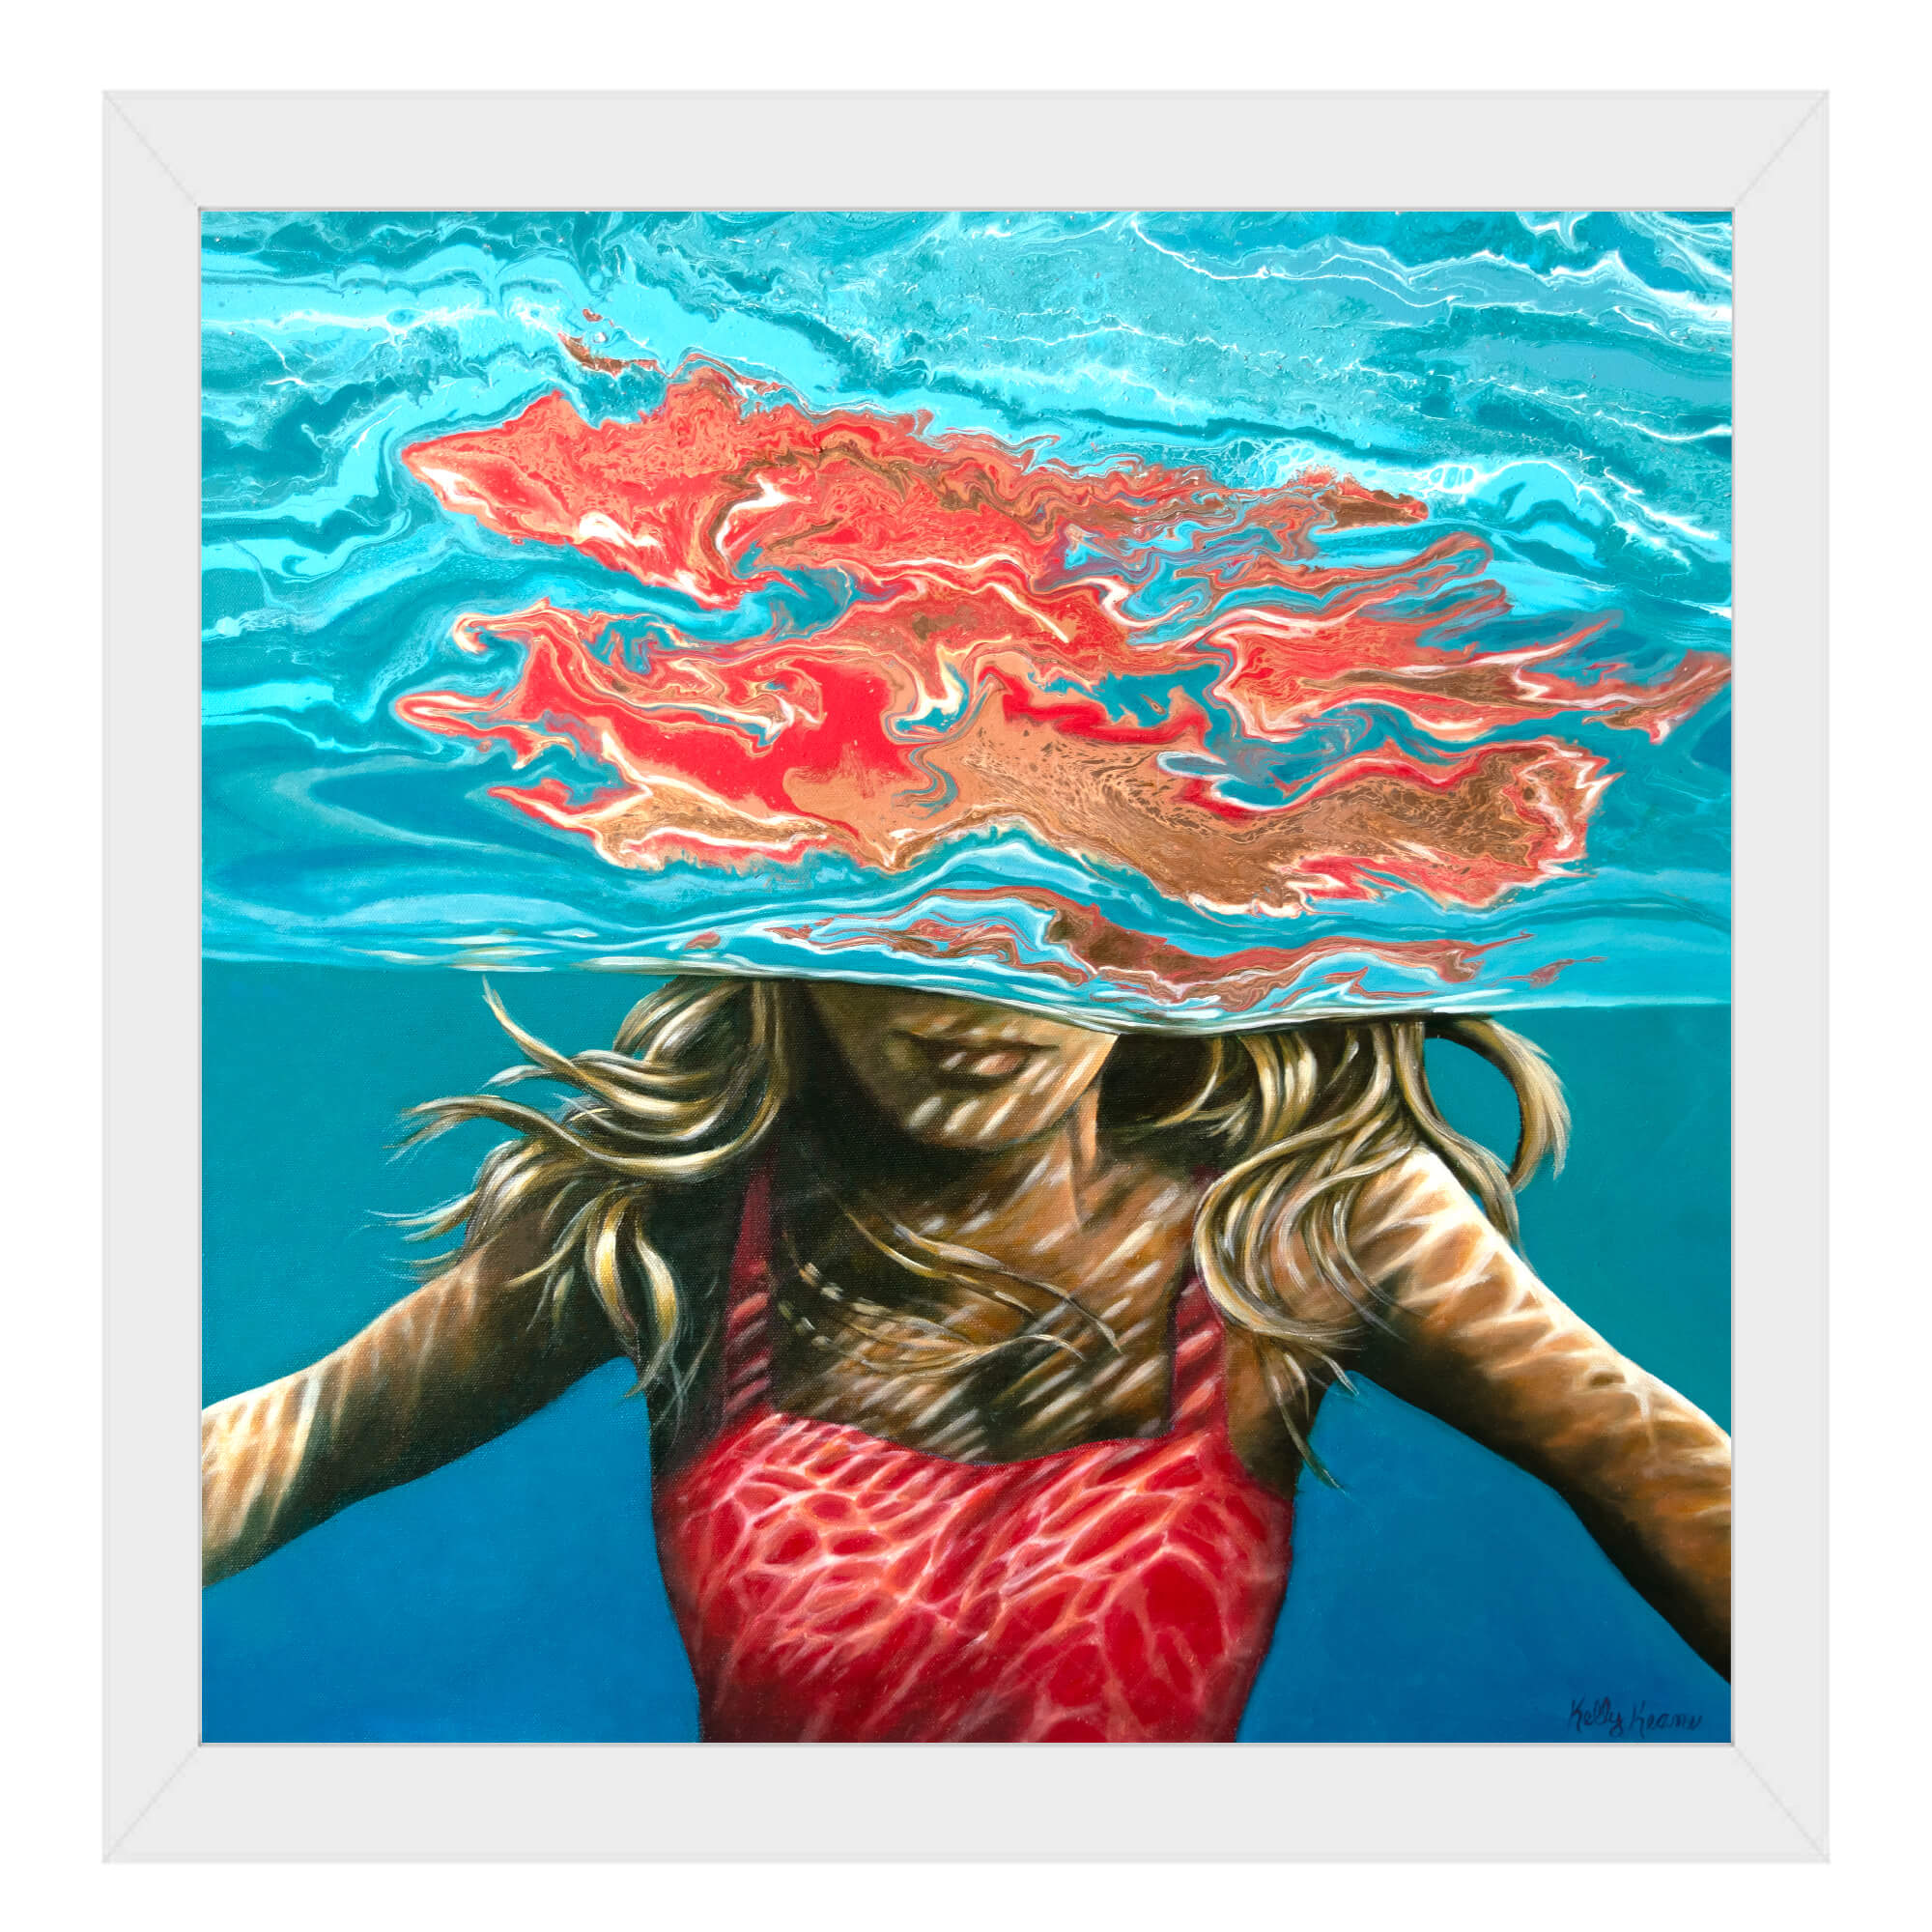 Paper art print featuring a woman submerged in the water  by hawaii artist Kelly Keane